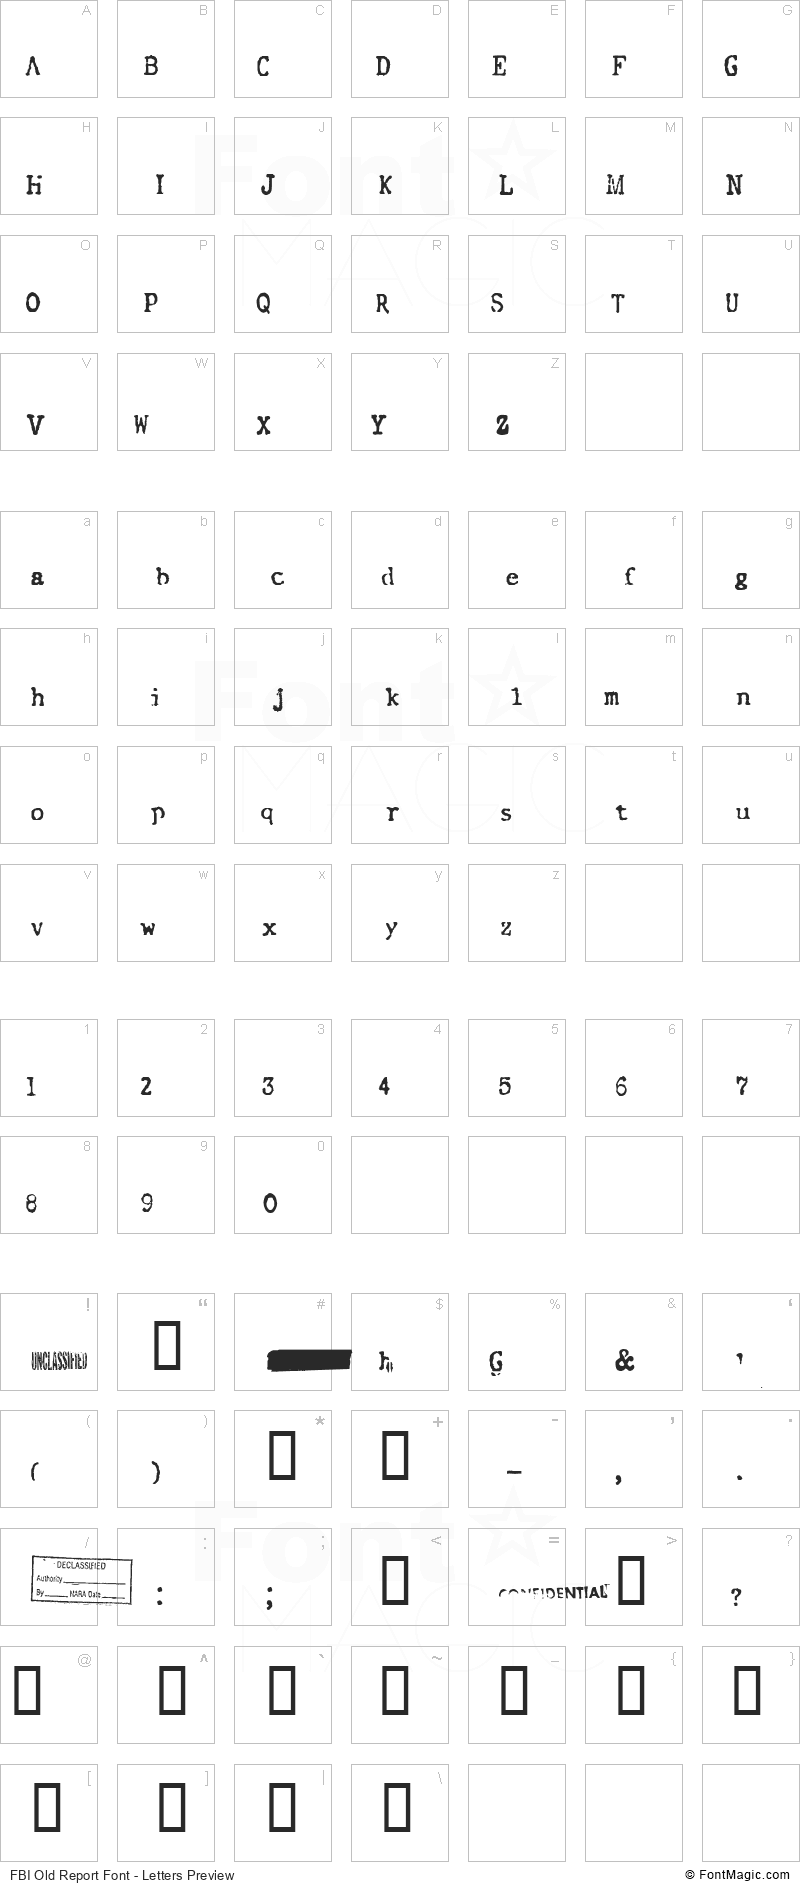 FBI Old Report Font - All Latters Preview Chart